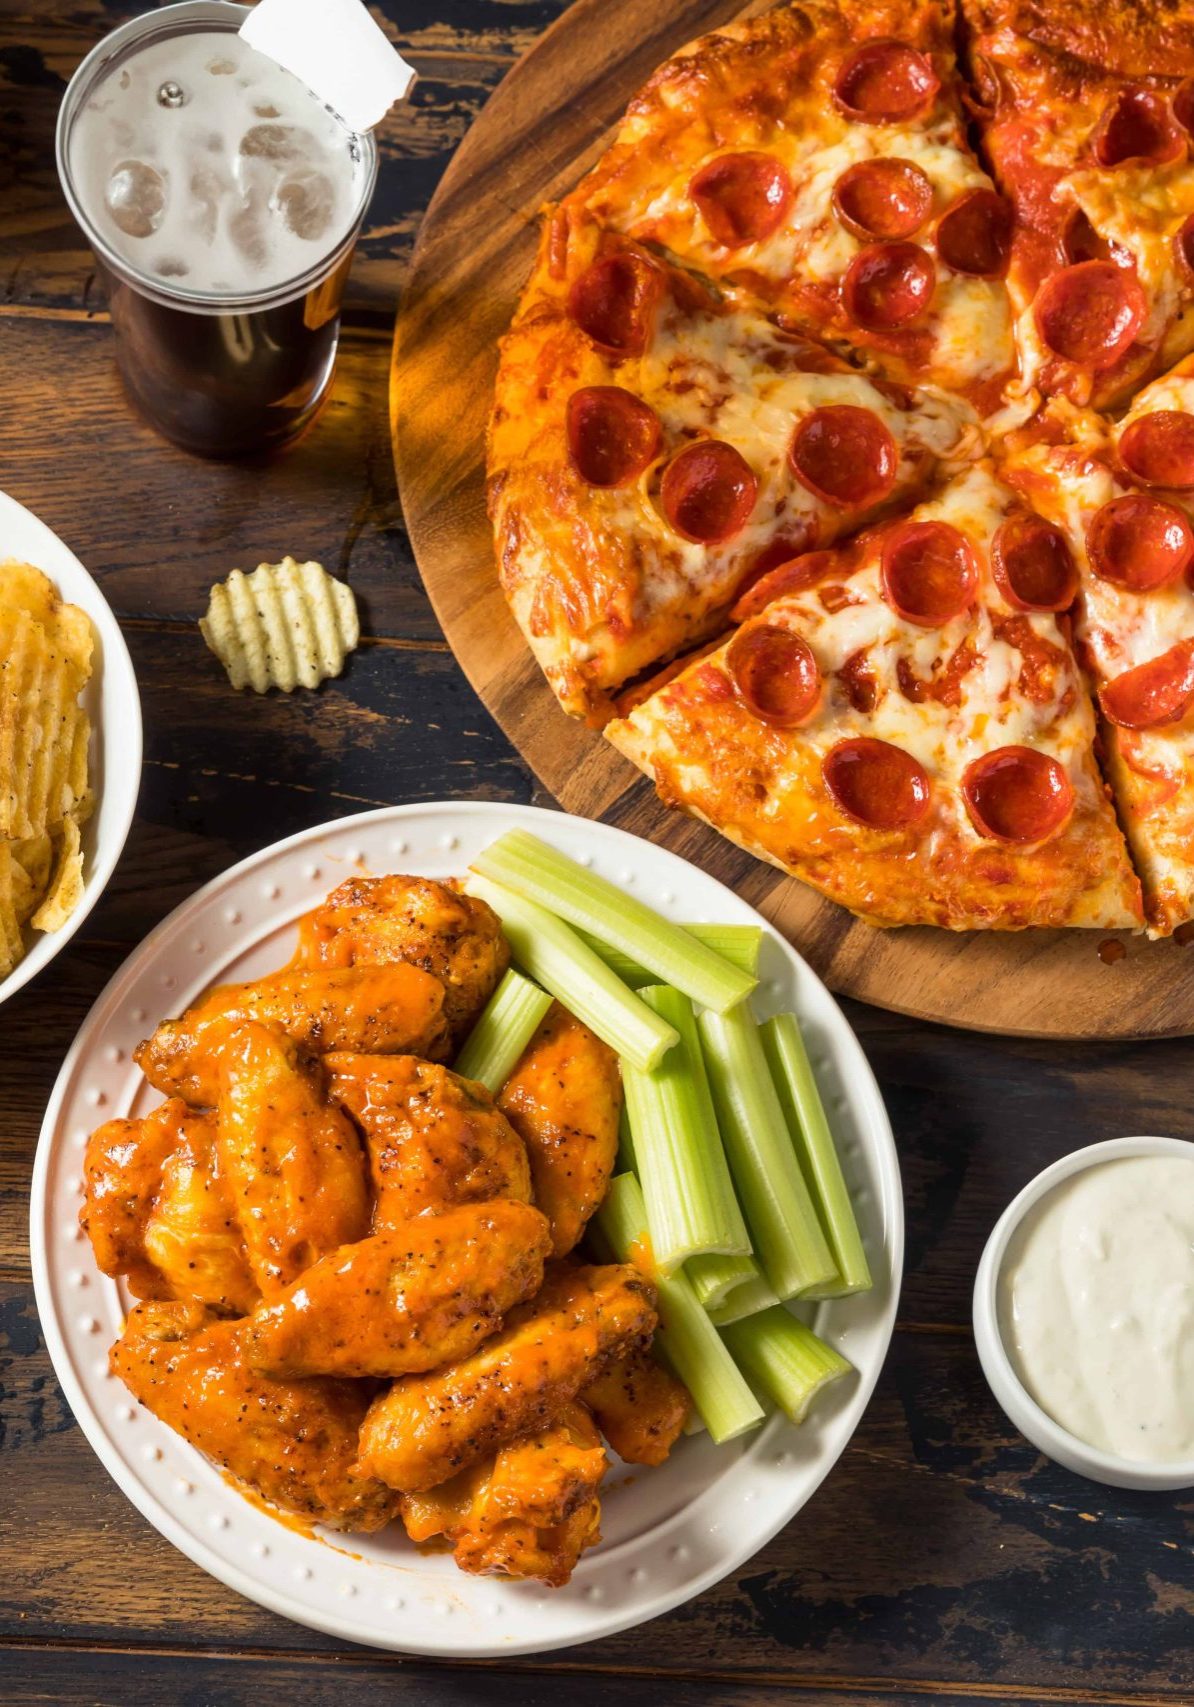 Pizza, wings, celery and chips on a wooden table.